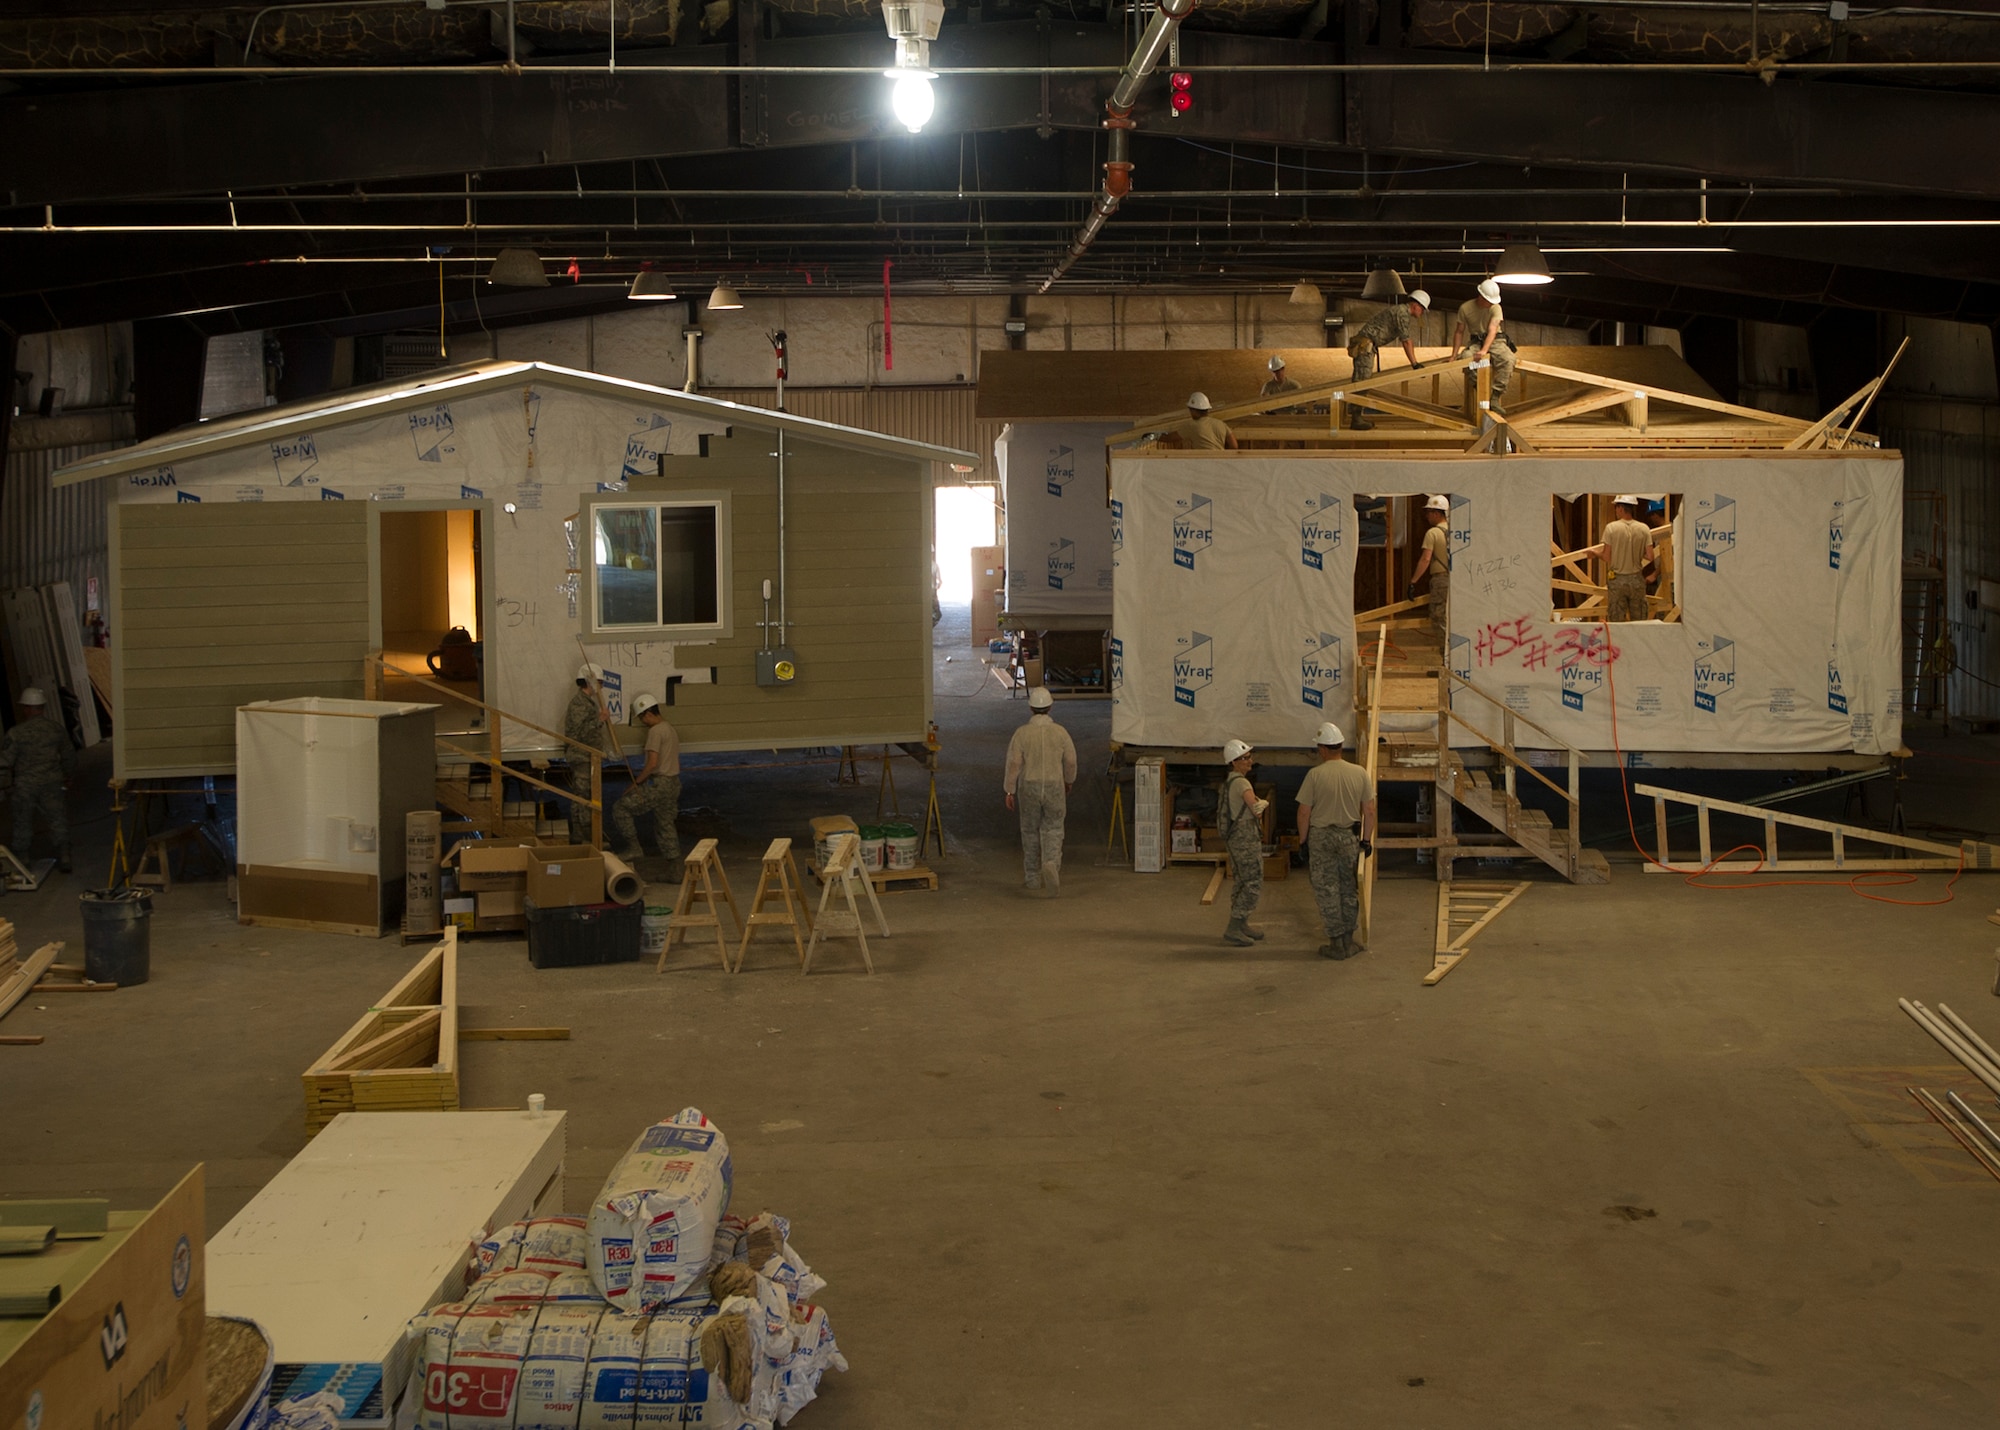 Citizen Airmen from the 446th Civil Engineer Squadron and Seabee’s from the Naval Mobile Construction Battalion 22 construct houses in a warehouse in Gallup, NM, June 13, 2016. Reservists and Seabee’s participated in Operation Footprint, a partnership of the Southwest Indian Foundation and the Department of Defense’s Innovative Readiness Training program, which provides an avenue for training military members. The two-week training allowed joint service members to build homes, which will be given to tribal members of the Navajo Nation who are in need. (U.S. Air Force Reserve photo by Tech. Sgt. Bryan Hull)